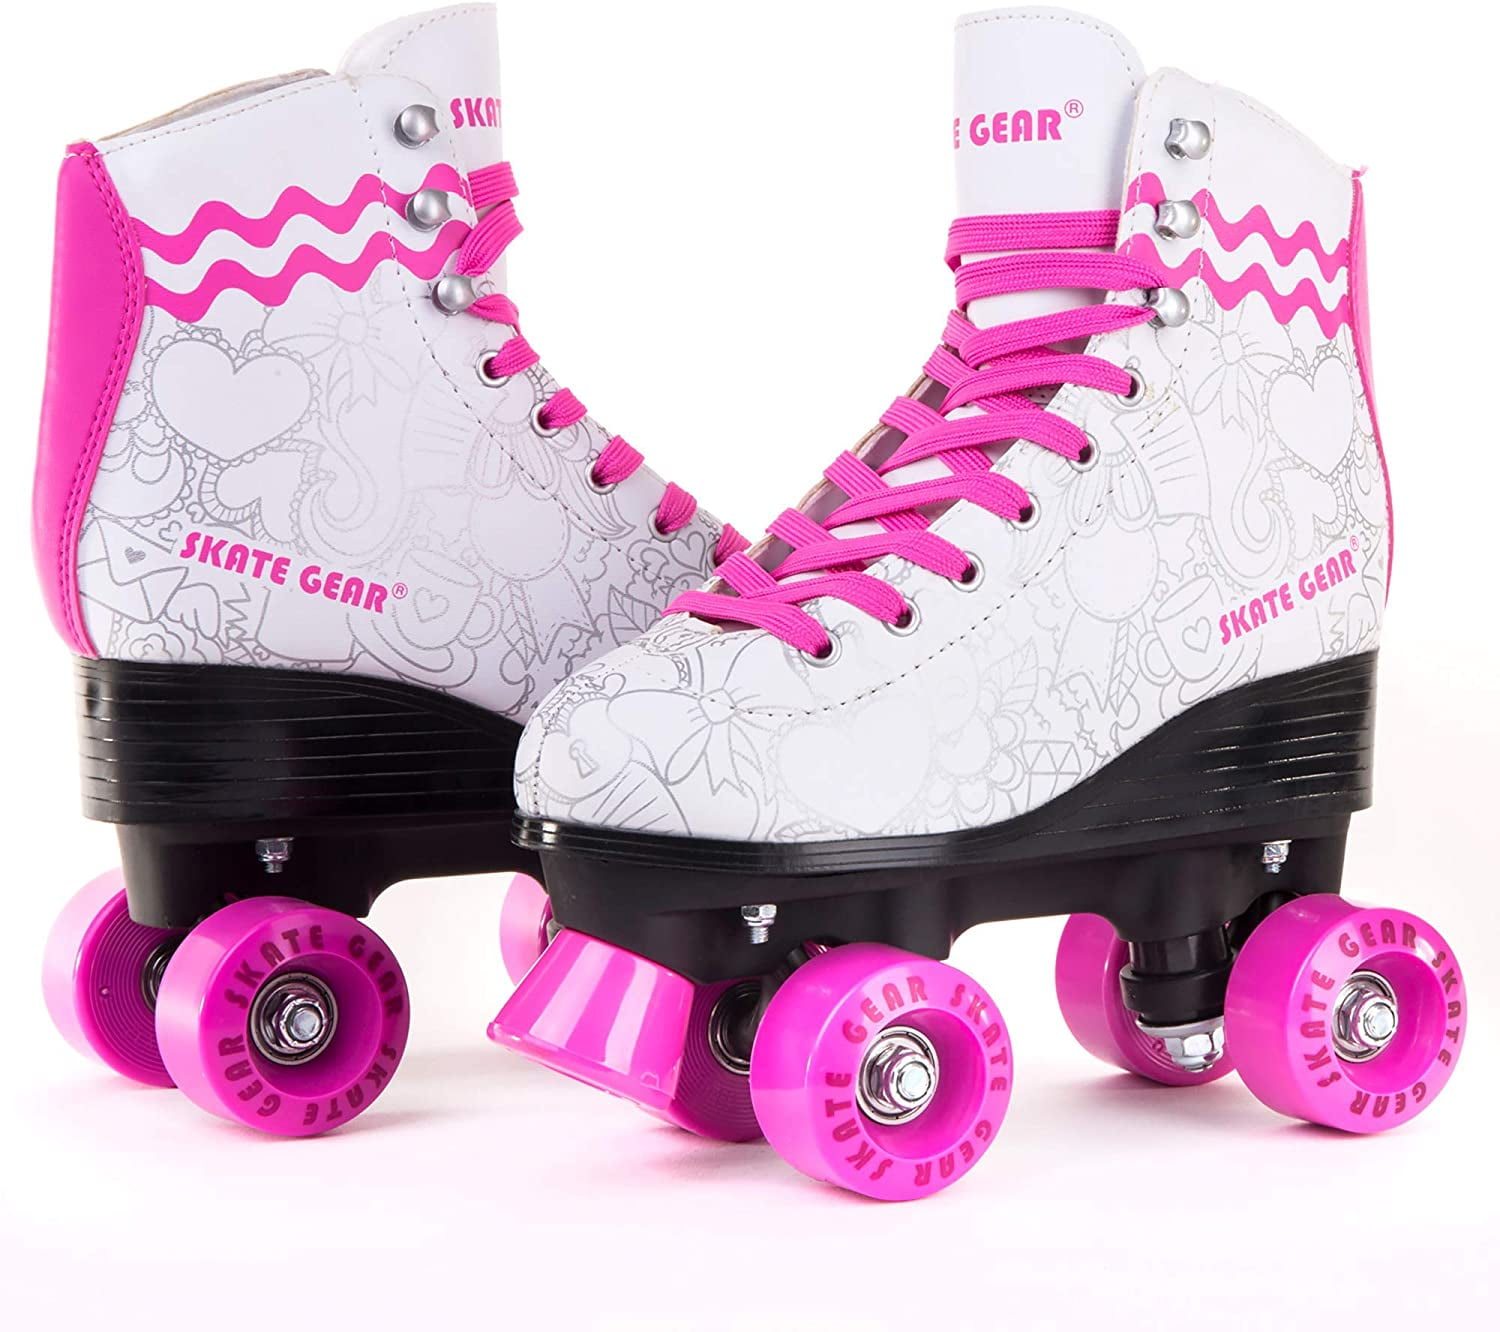 Skate Gear Retro Quad Roller Skates with Structured Boot 